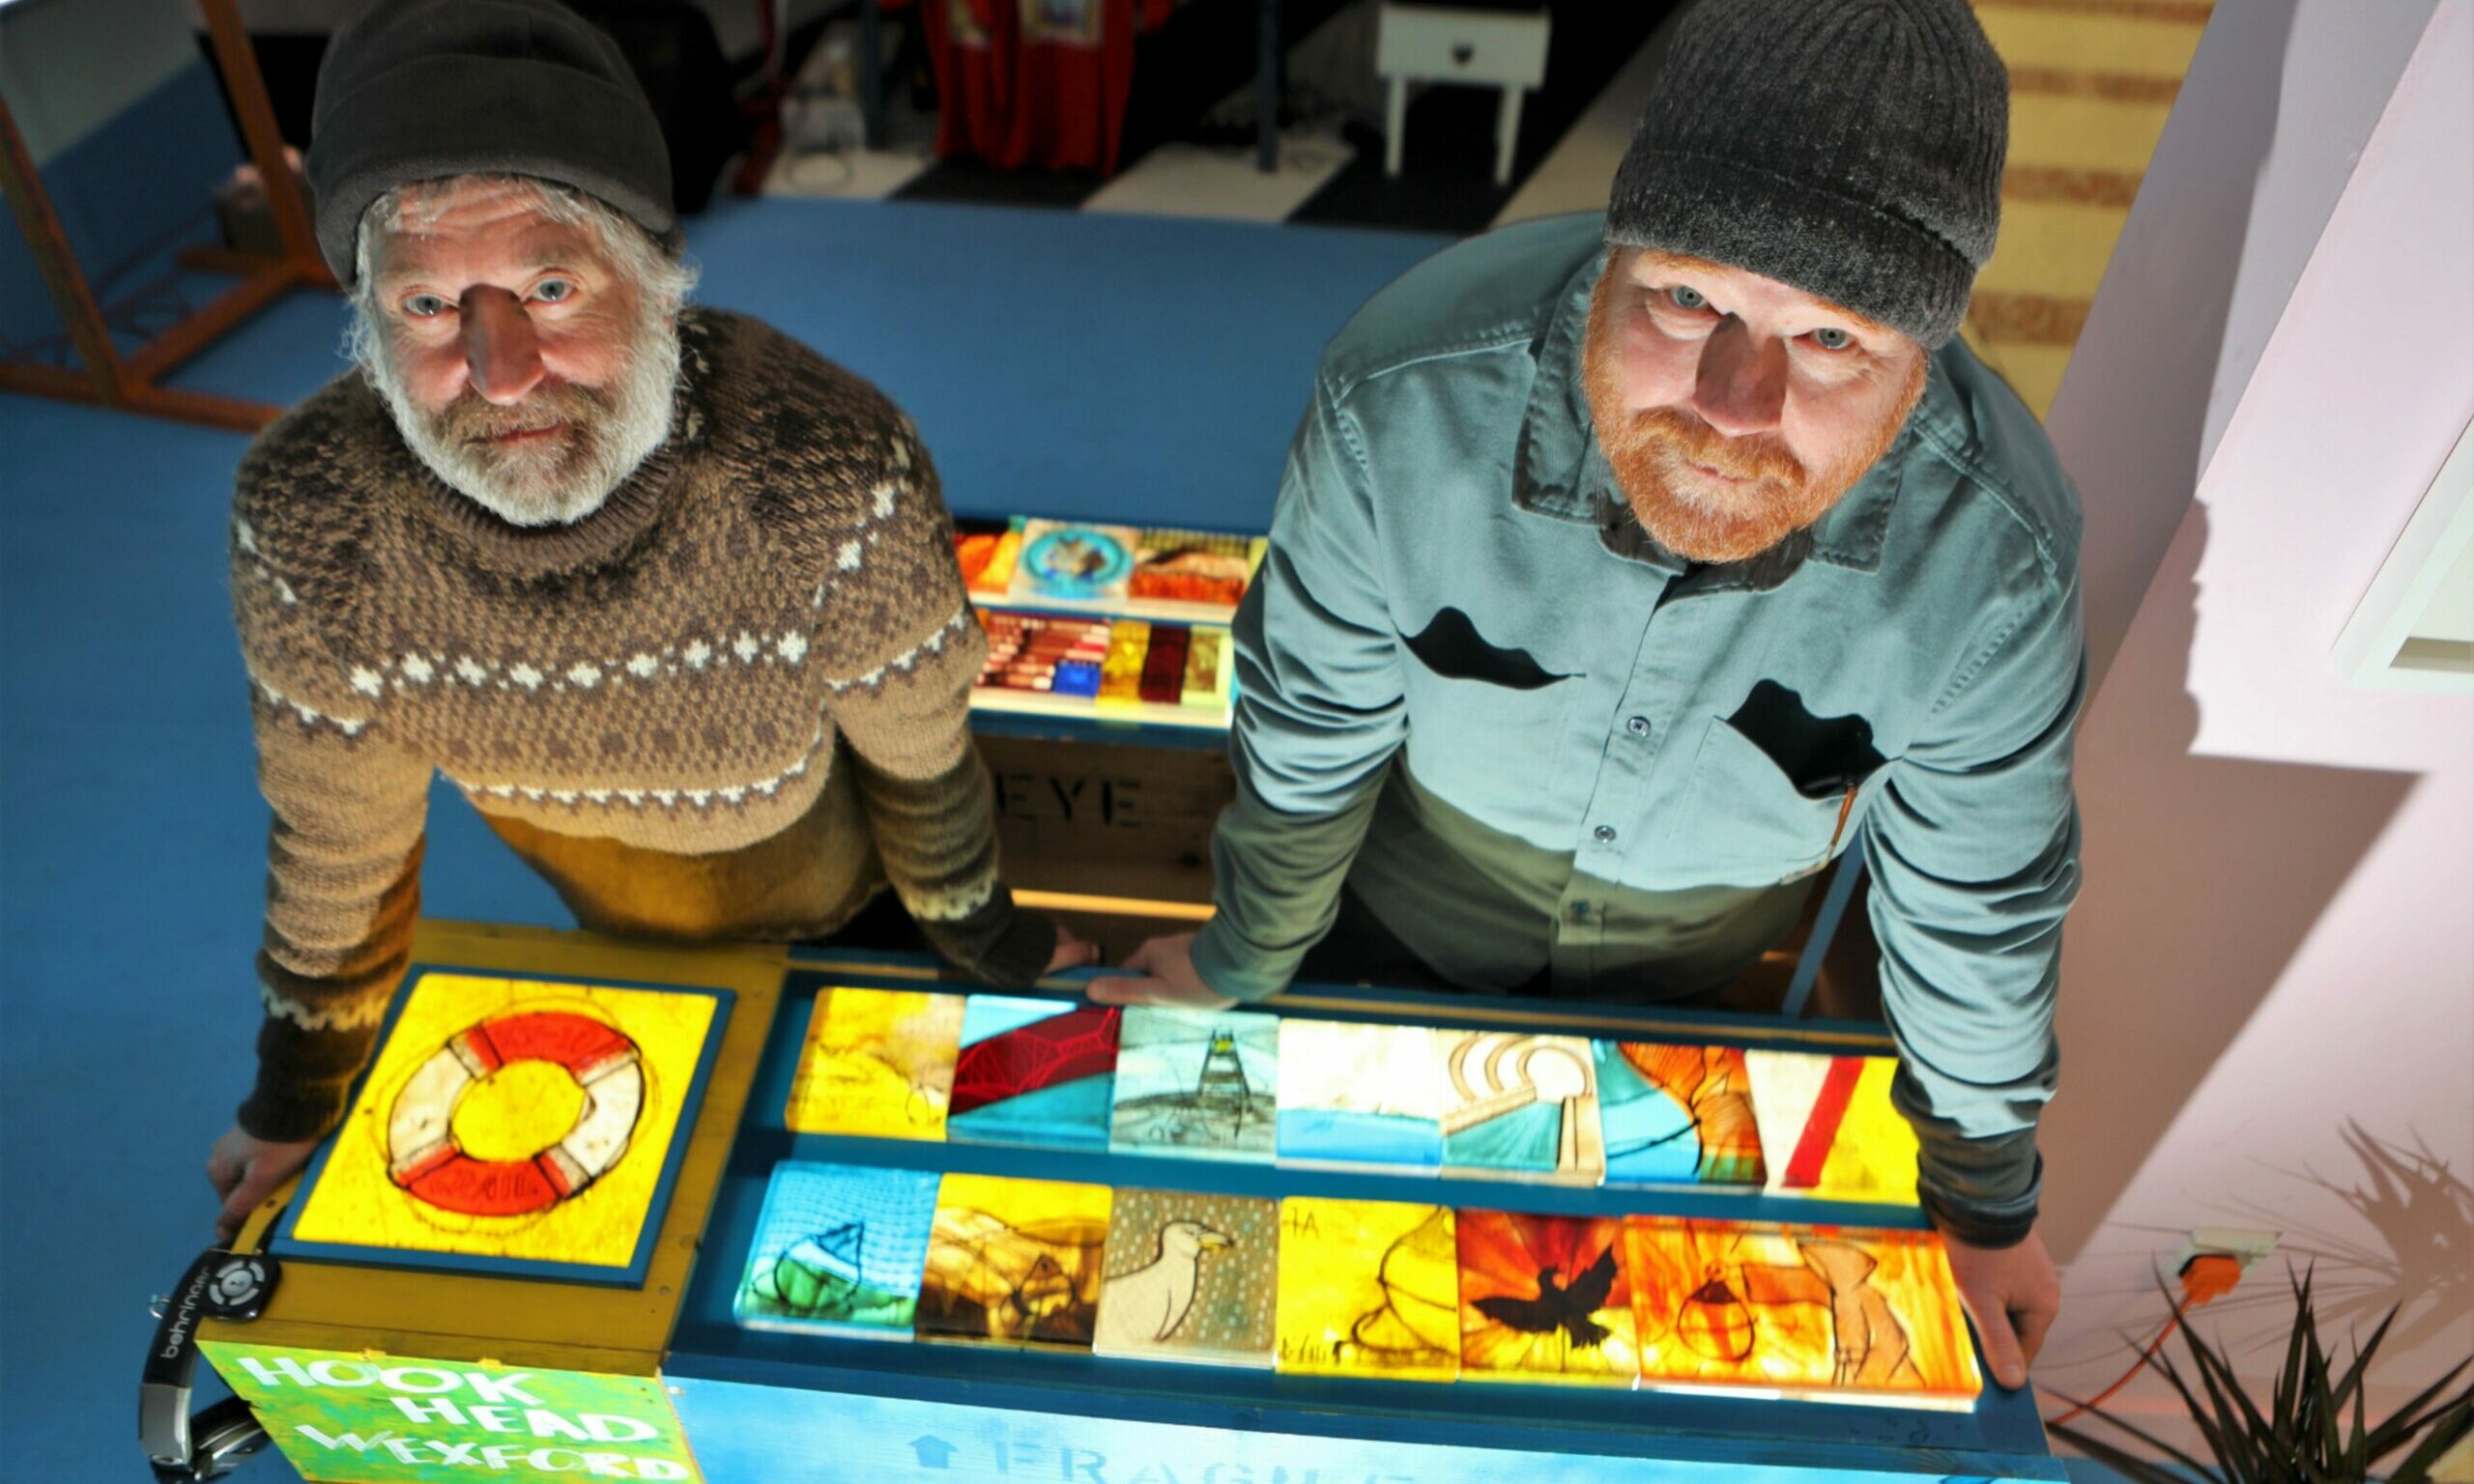 Fife artists Kenny Anderson (King Creosote) and Keny Drew created the KY-10 exhibition.